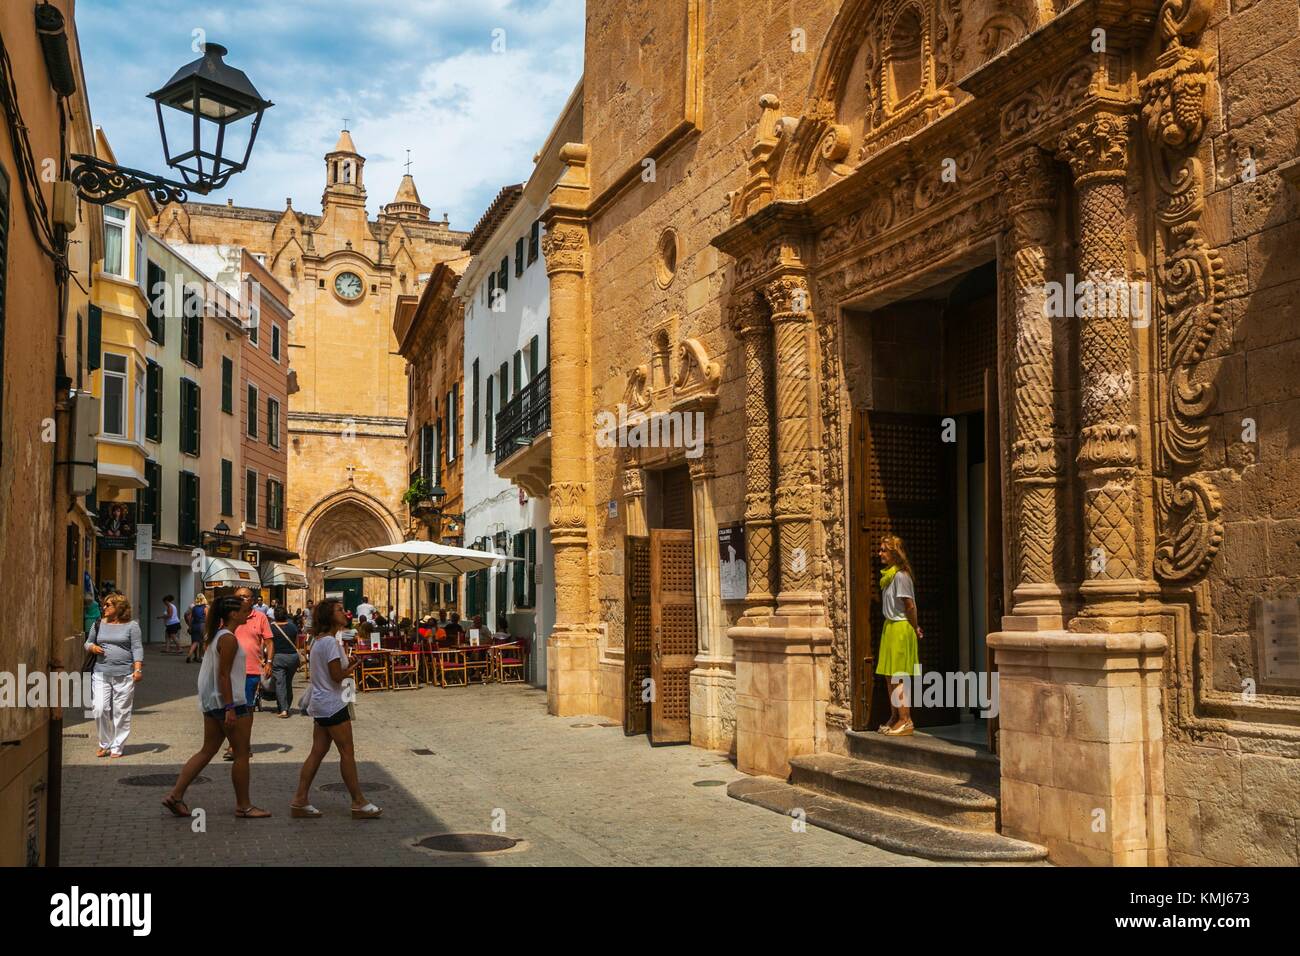 On the right, Roser Church. In the background, Cathedral. Historical Center. Ciutadella. Minorca. Balearic Islands. Spain Stock Photo